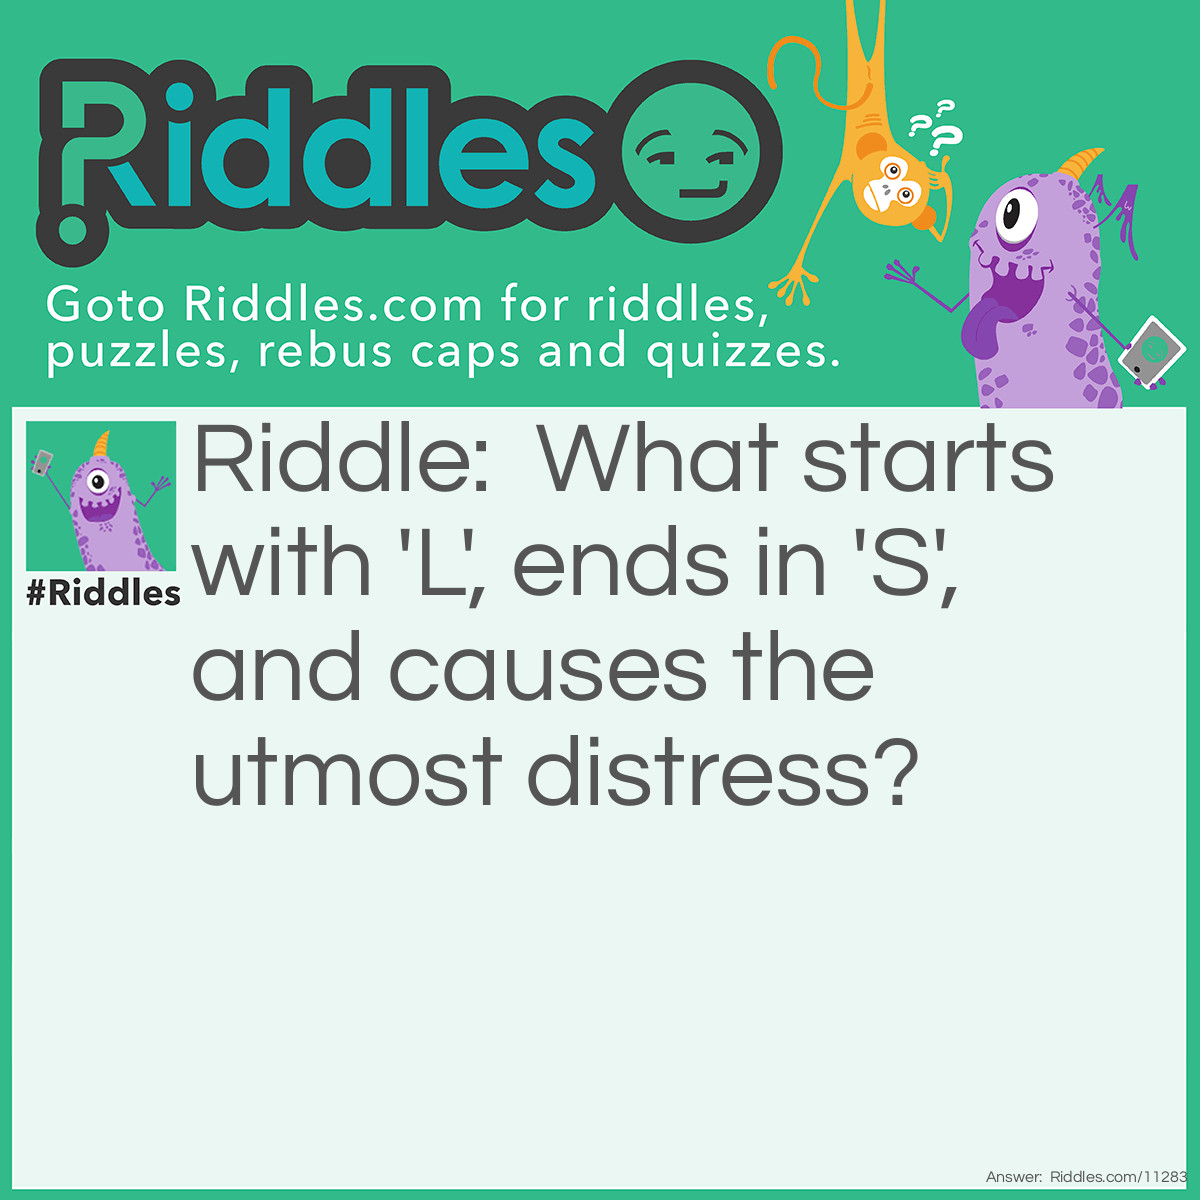 Riddle: What starts with 'L', ends in 'S', and causes the utmost distress? Answer: Loneliness.